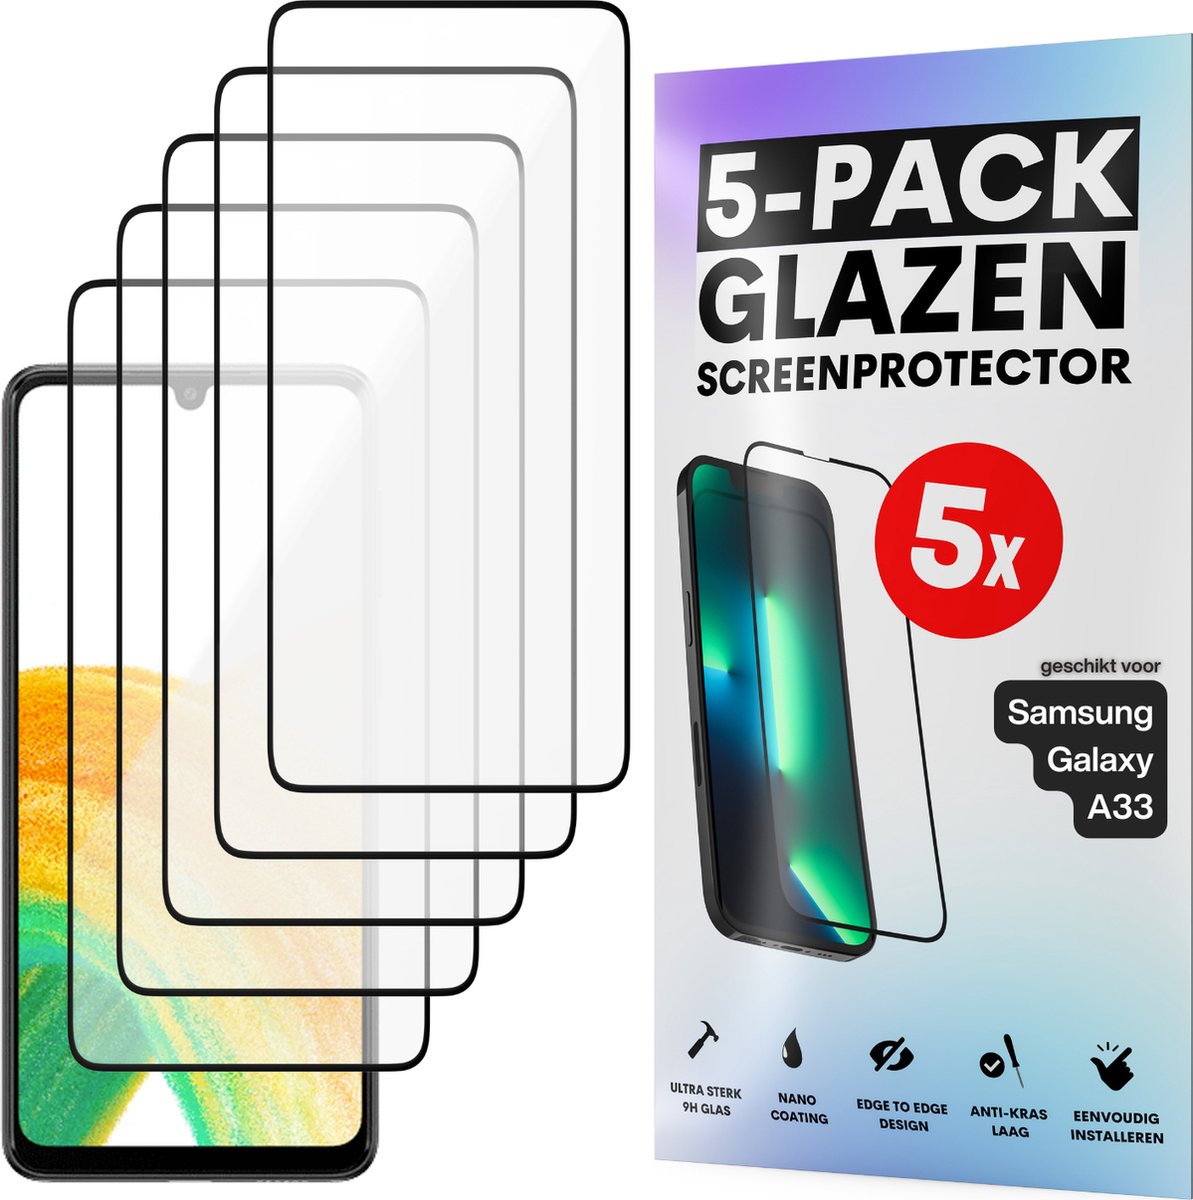 Screenprotector - Geschikt voor Samsung Galaxy A33 - Gehard Glas - Full Cover Tempered Glass - Case Friendly - 5 Pack